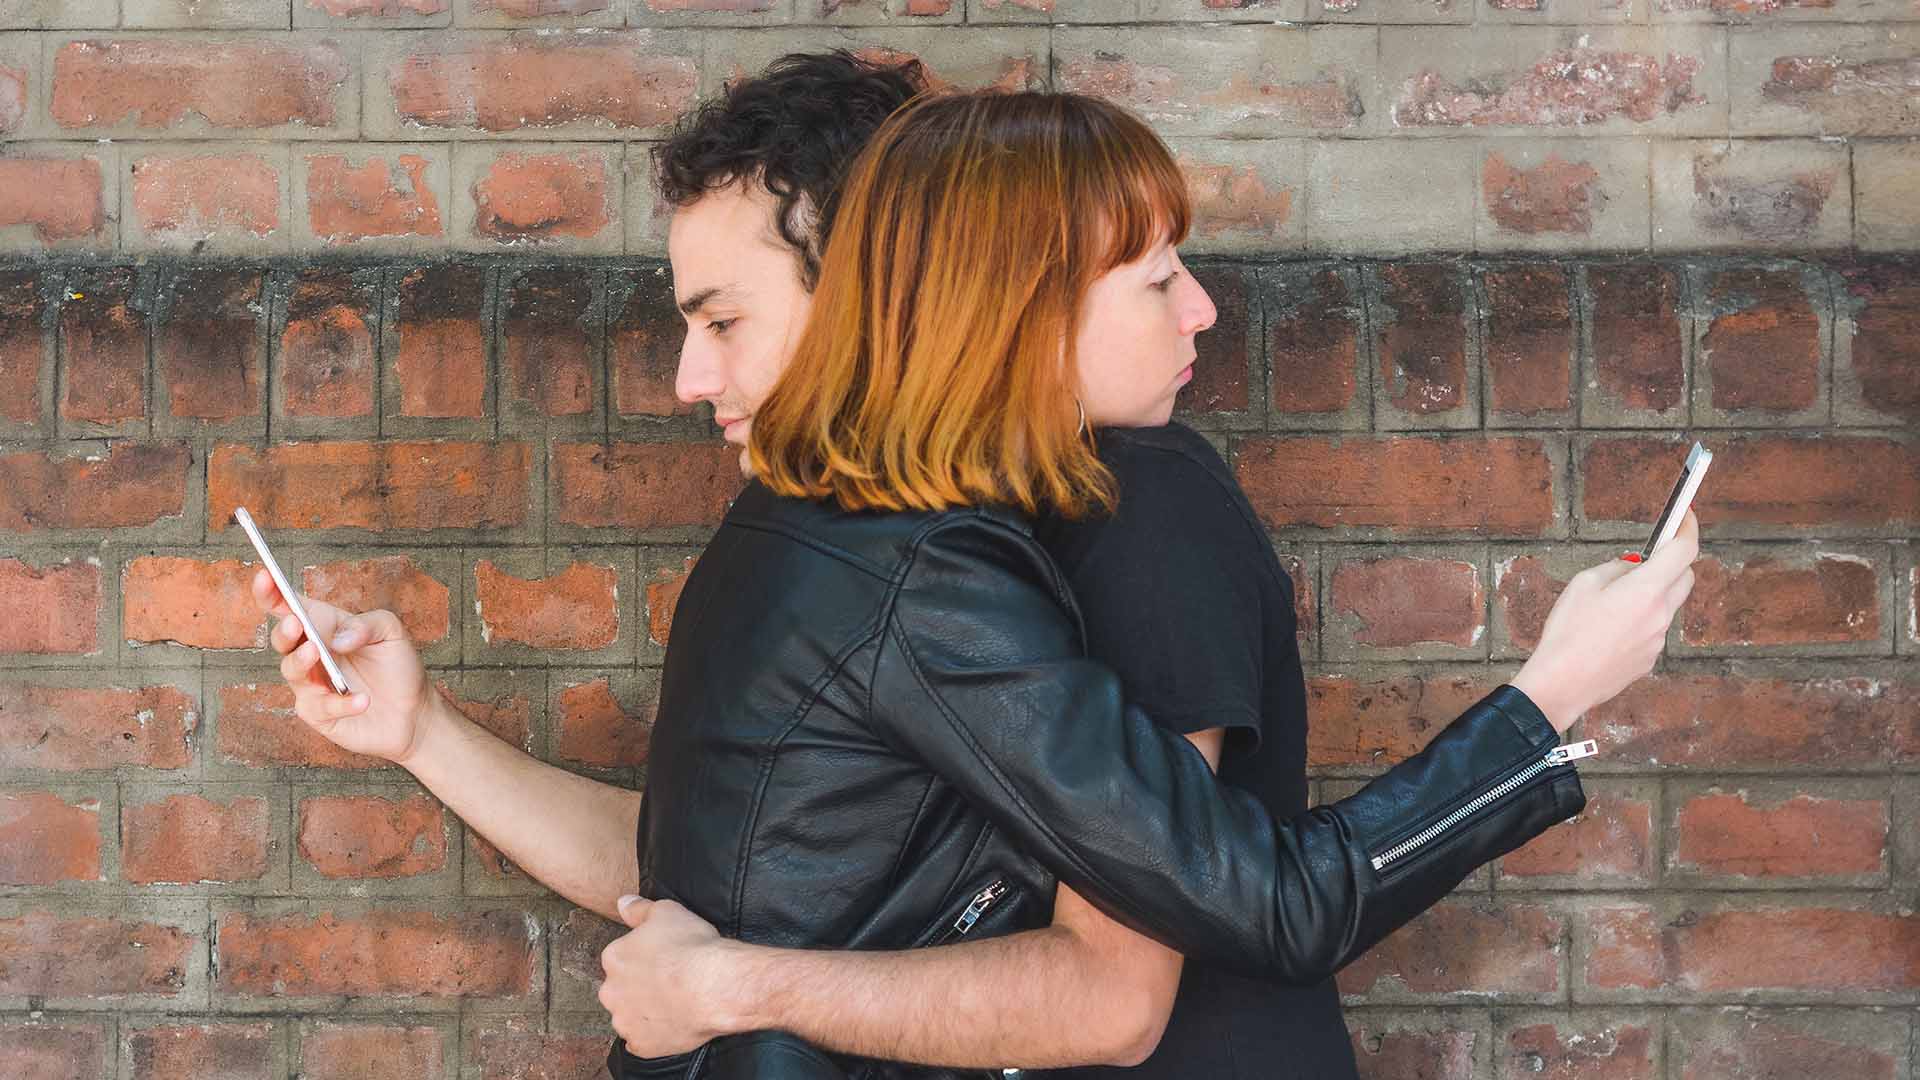 Orange-haired woman and brunette man wearing black, hugging each other while looking at their phones with one hand.